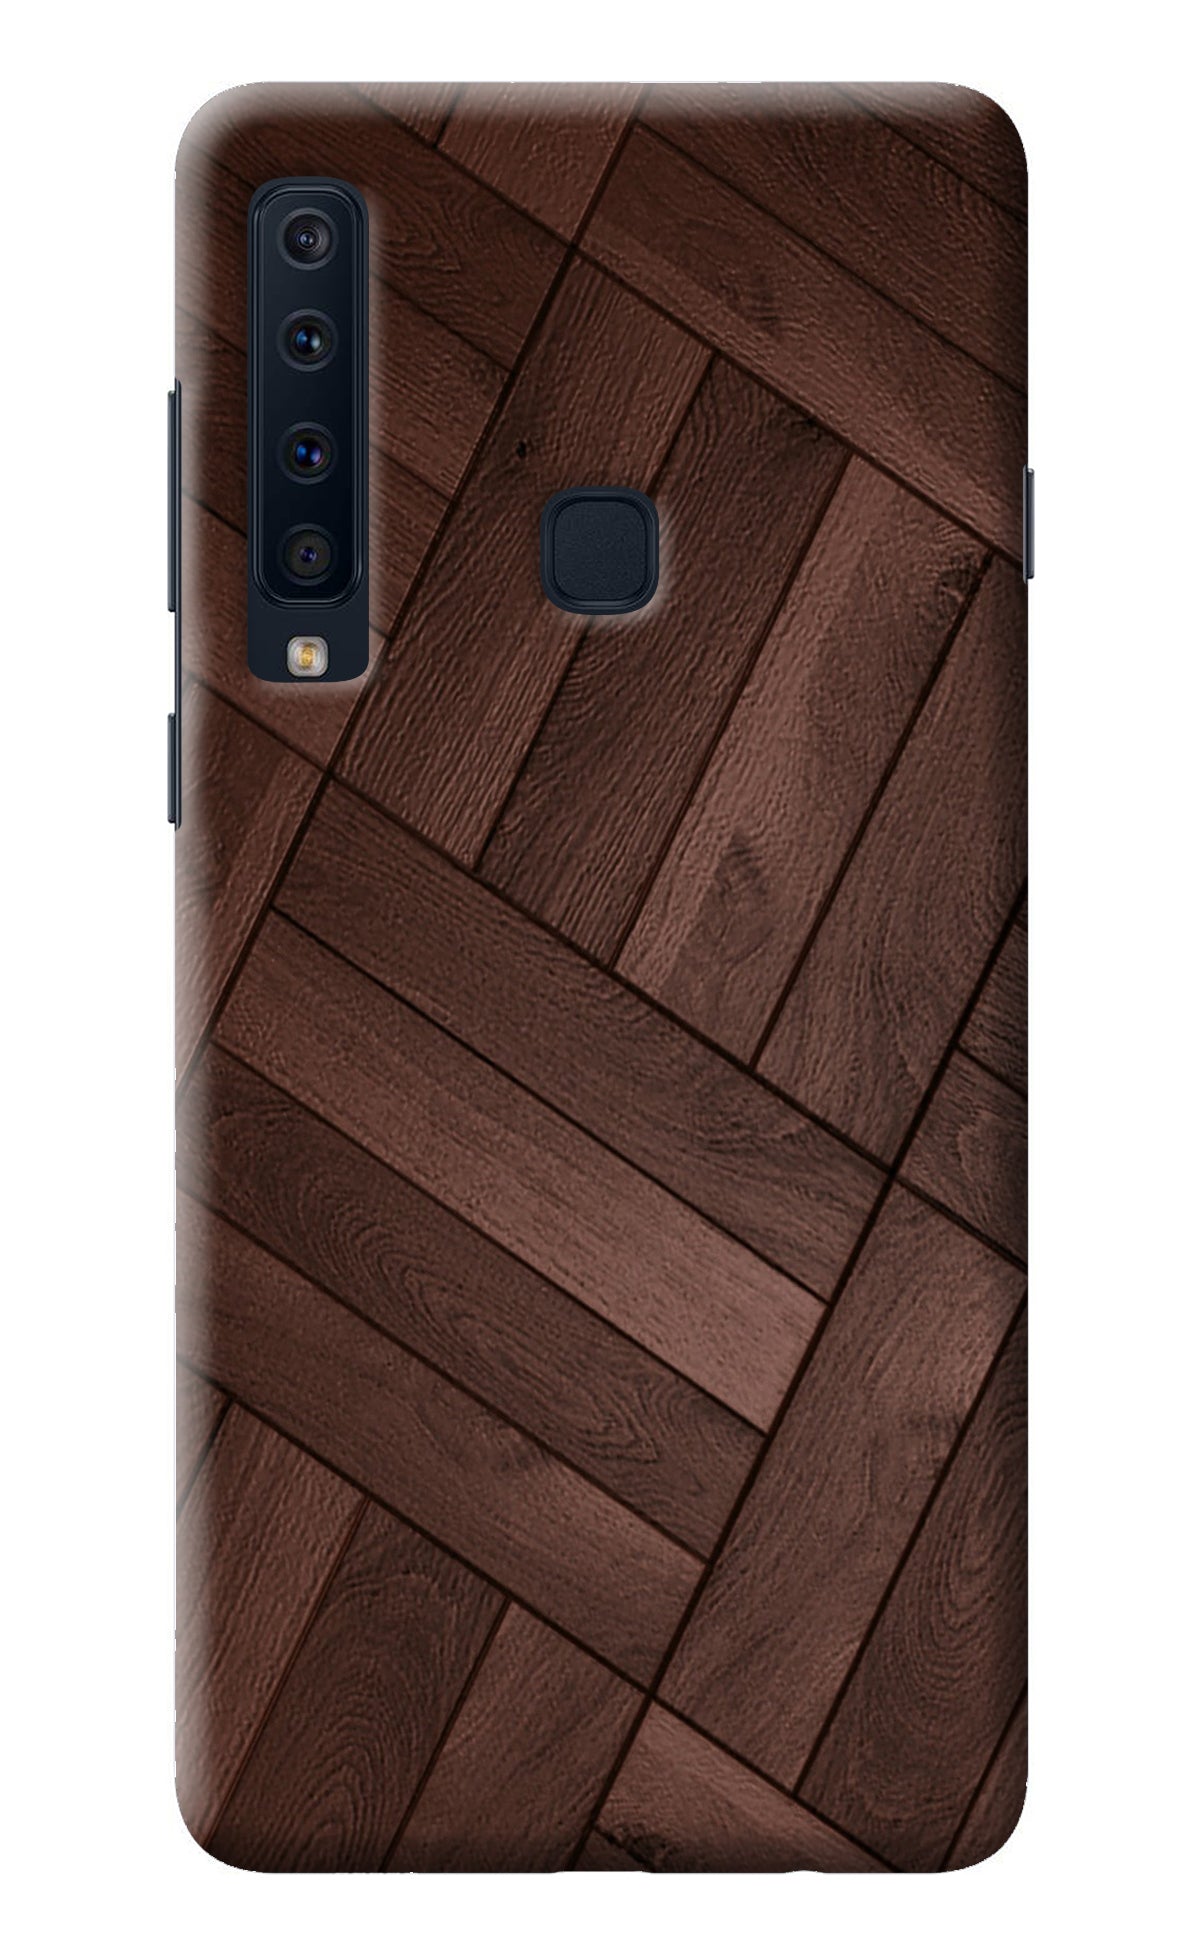 Wooden Texture Design Samsung A9 Back Cover